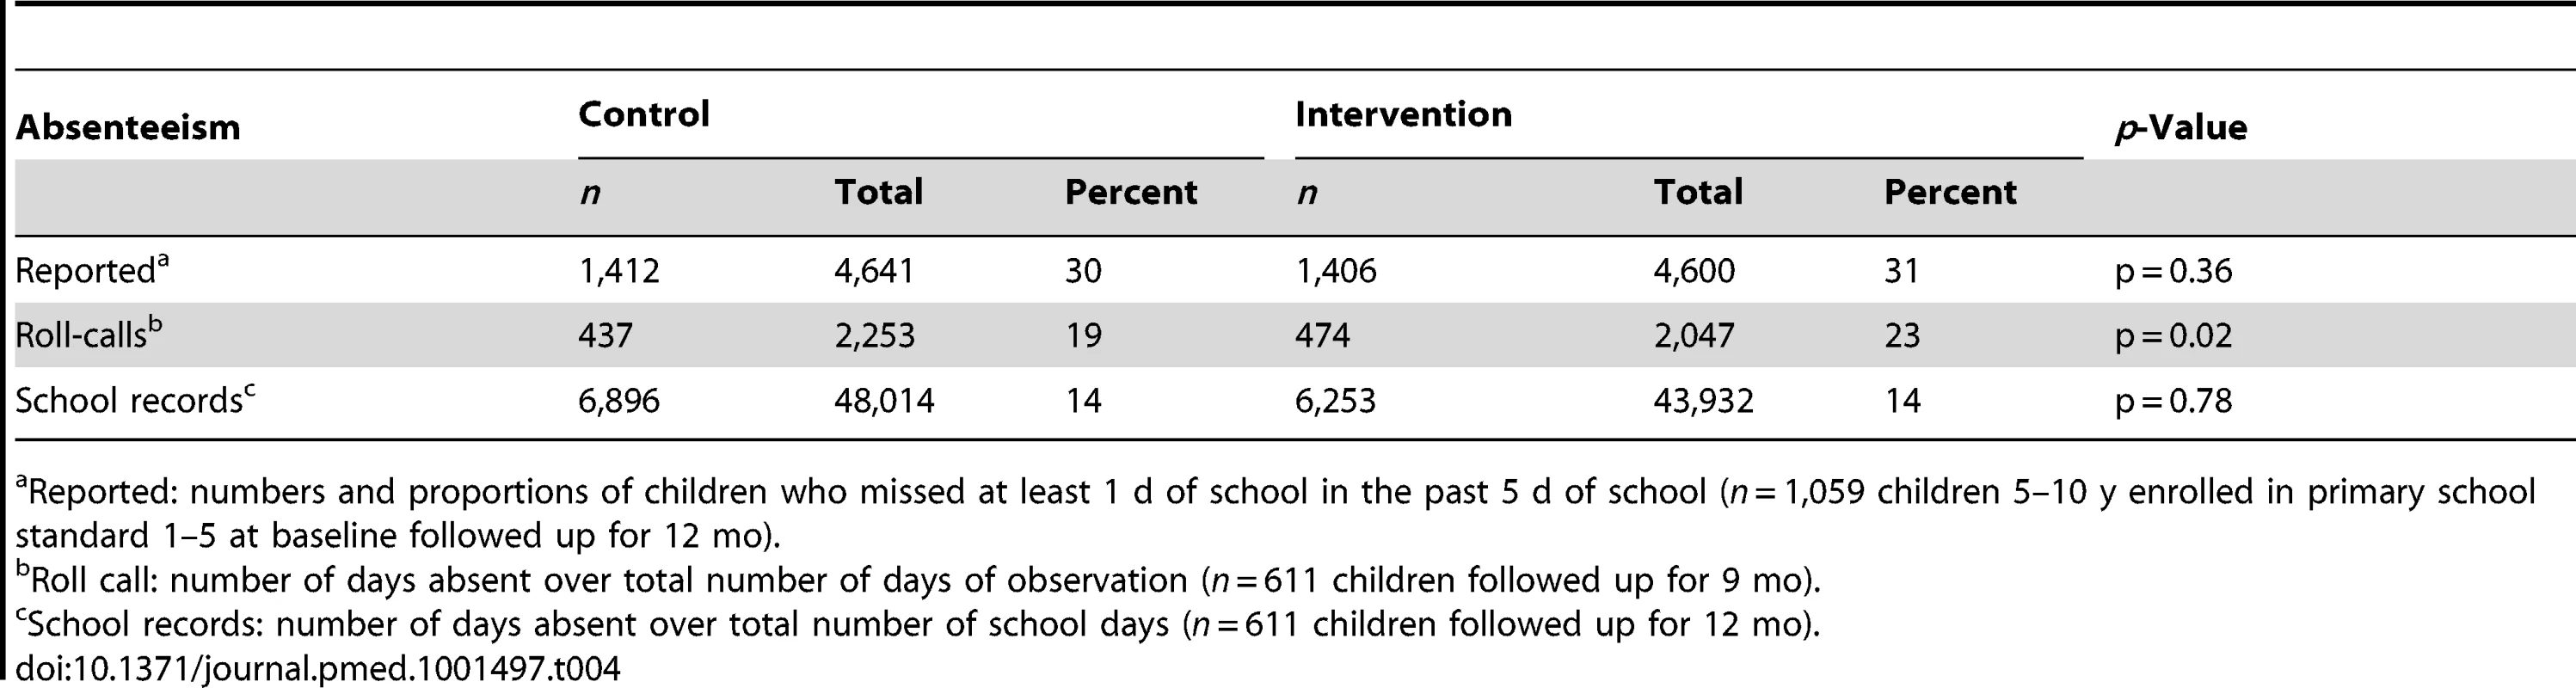 School absenteeism among school-aged children assessed via mother's report, classroom roll calls and school records.